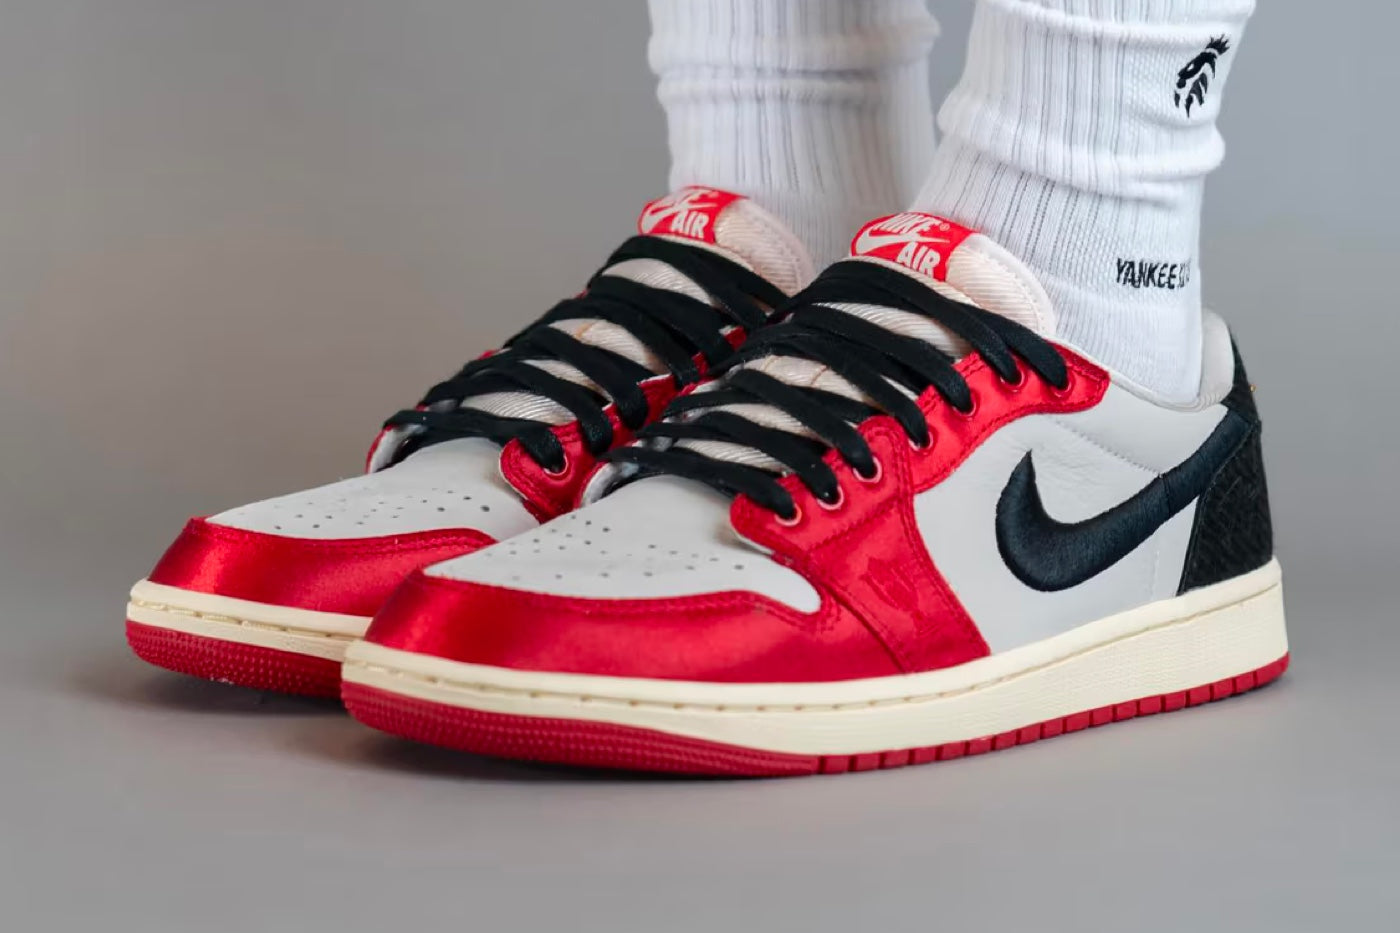 An On-Foot Look at the Brand Room x Air Jordan 1 Low OG